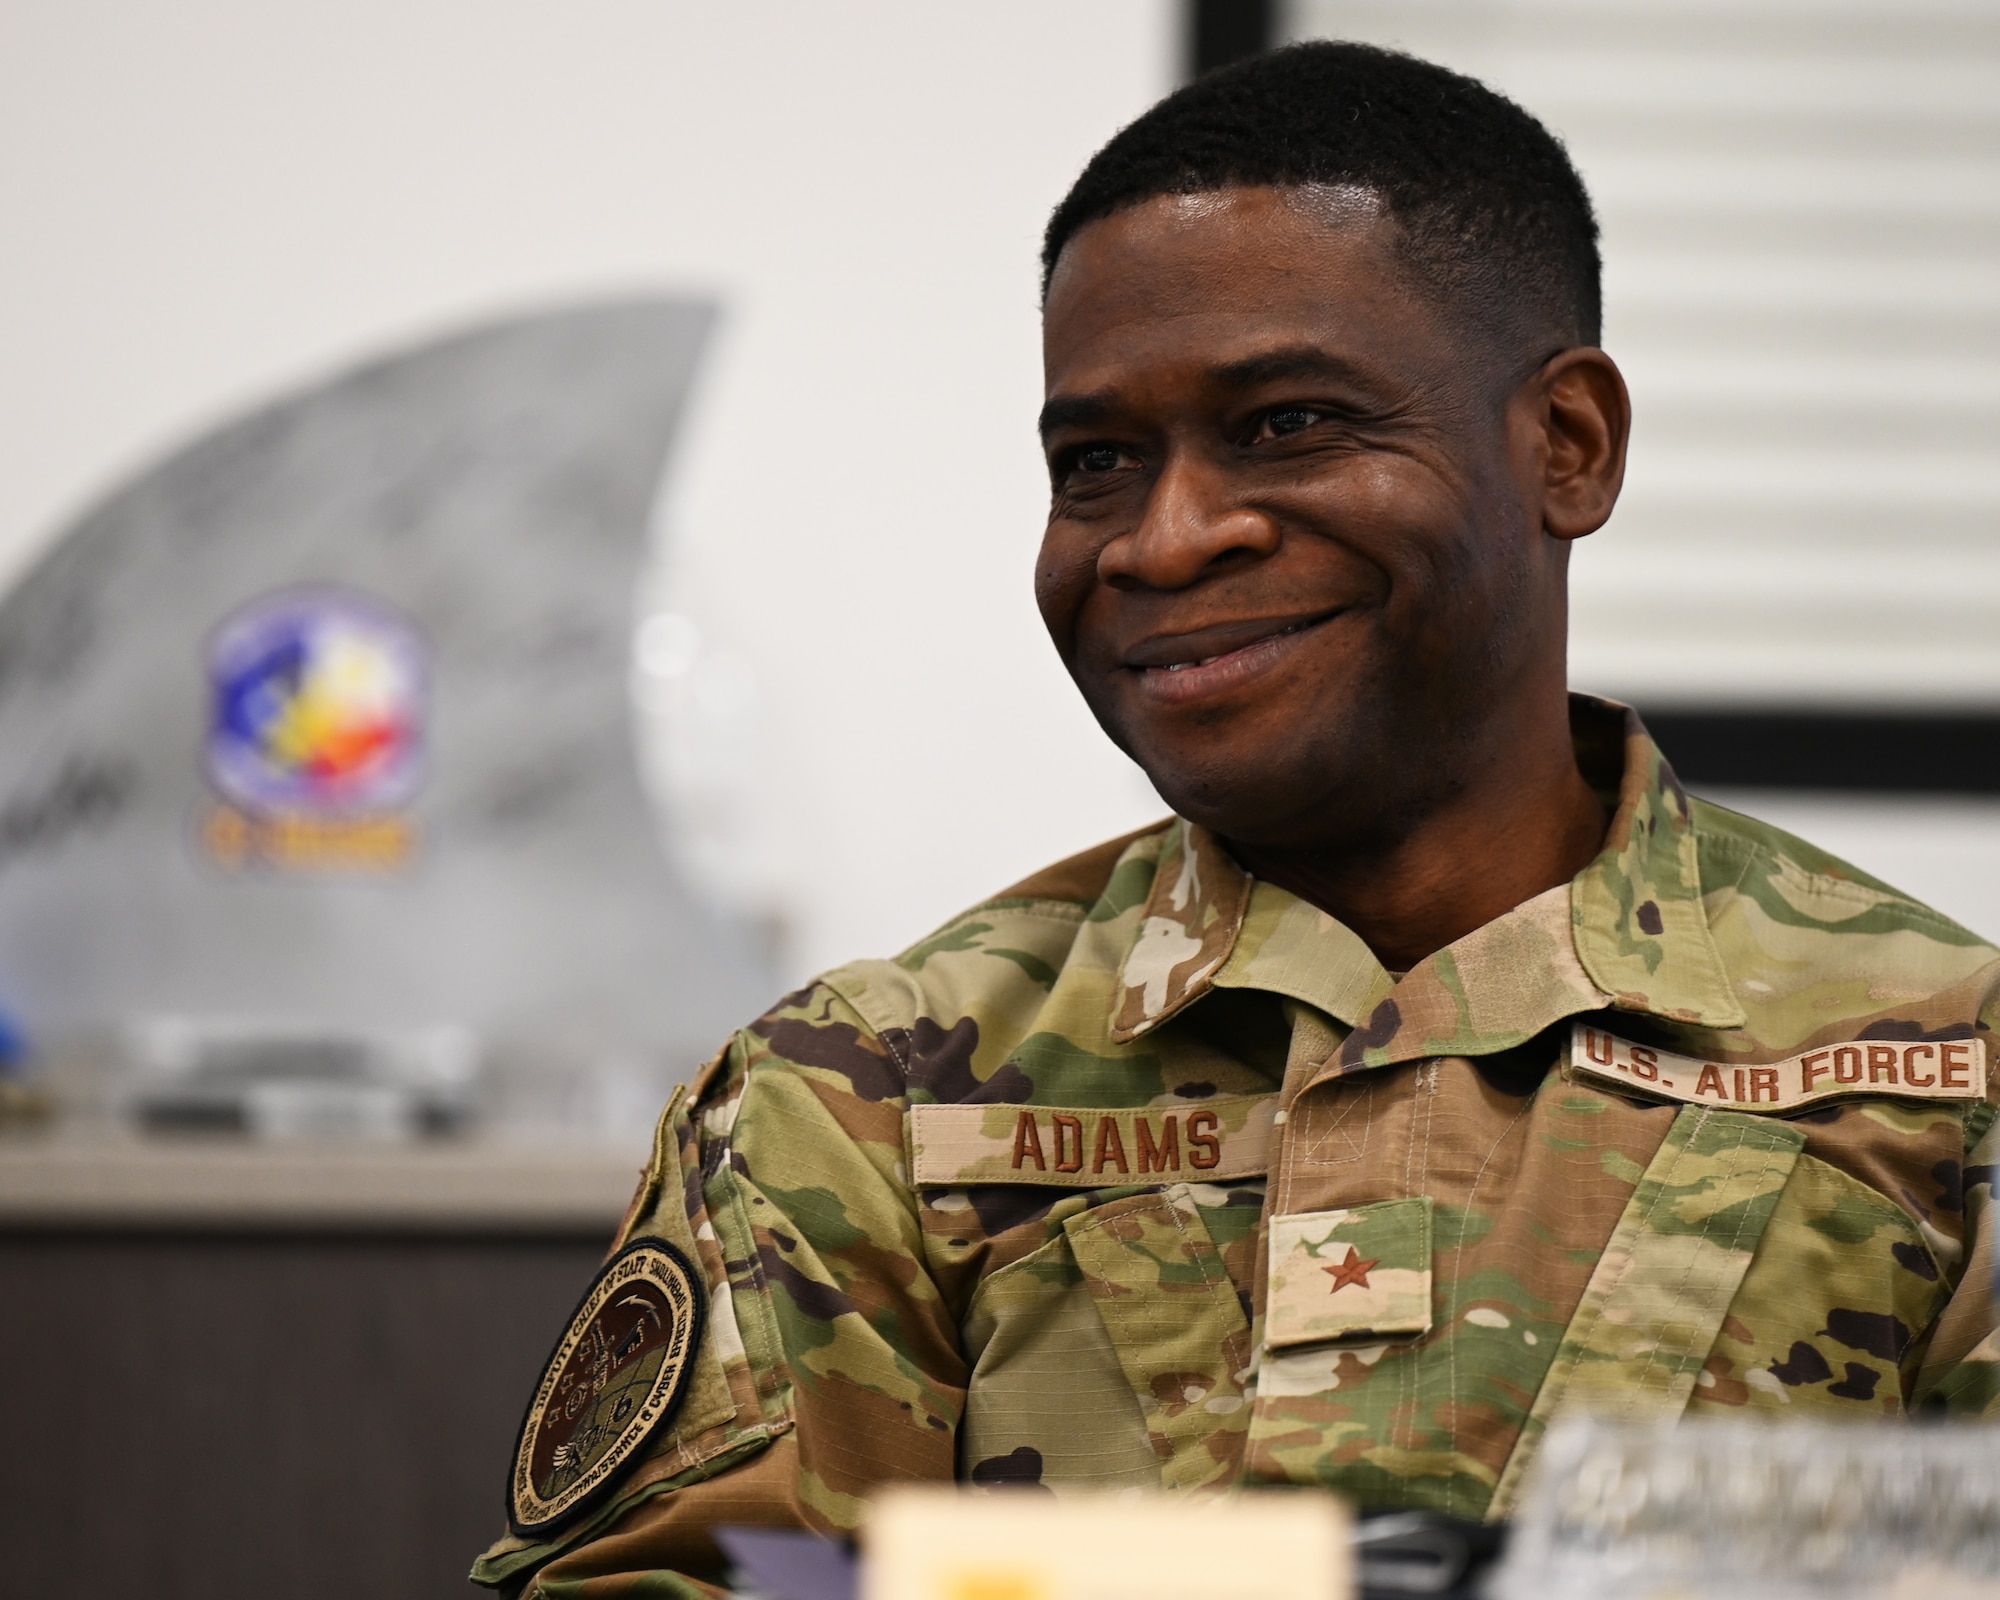 U.S. Air Force Brig. Gen. Terrence A. Adams, Military Deputy Director of Concepts and Strategy Air Force Futures, Headquarters U.S. Air Force, smiles during the Diversity and Inclusion Brown Bag at the Cressman Dining Facility, Goodfellow Air Force Base, Texas, Feb. 11, 2022. Adams led the panel discussion regarding diversity and inclusion, opening the floor for attendees to discuss important topics with senior leaders. (U.S. Air Force photo by Senior Airman Michael Bowman)